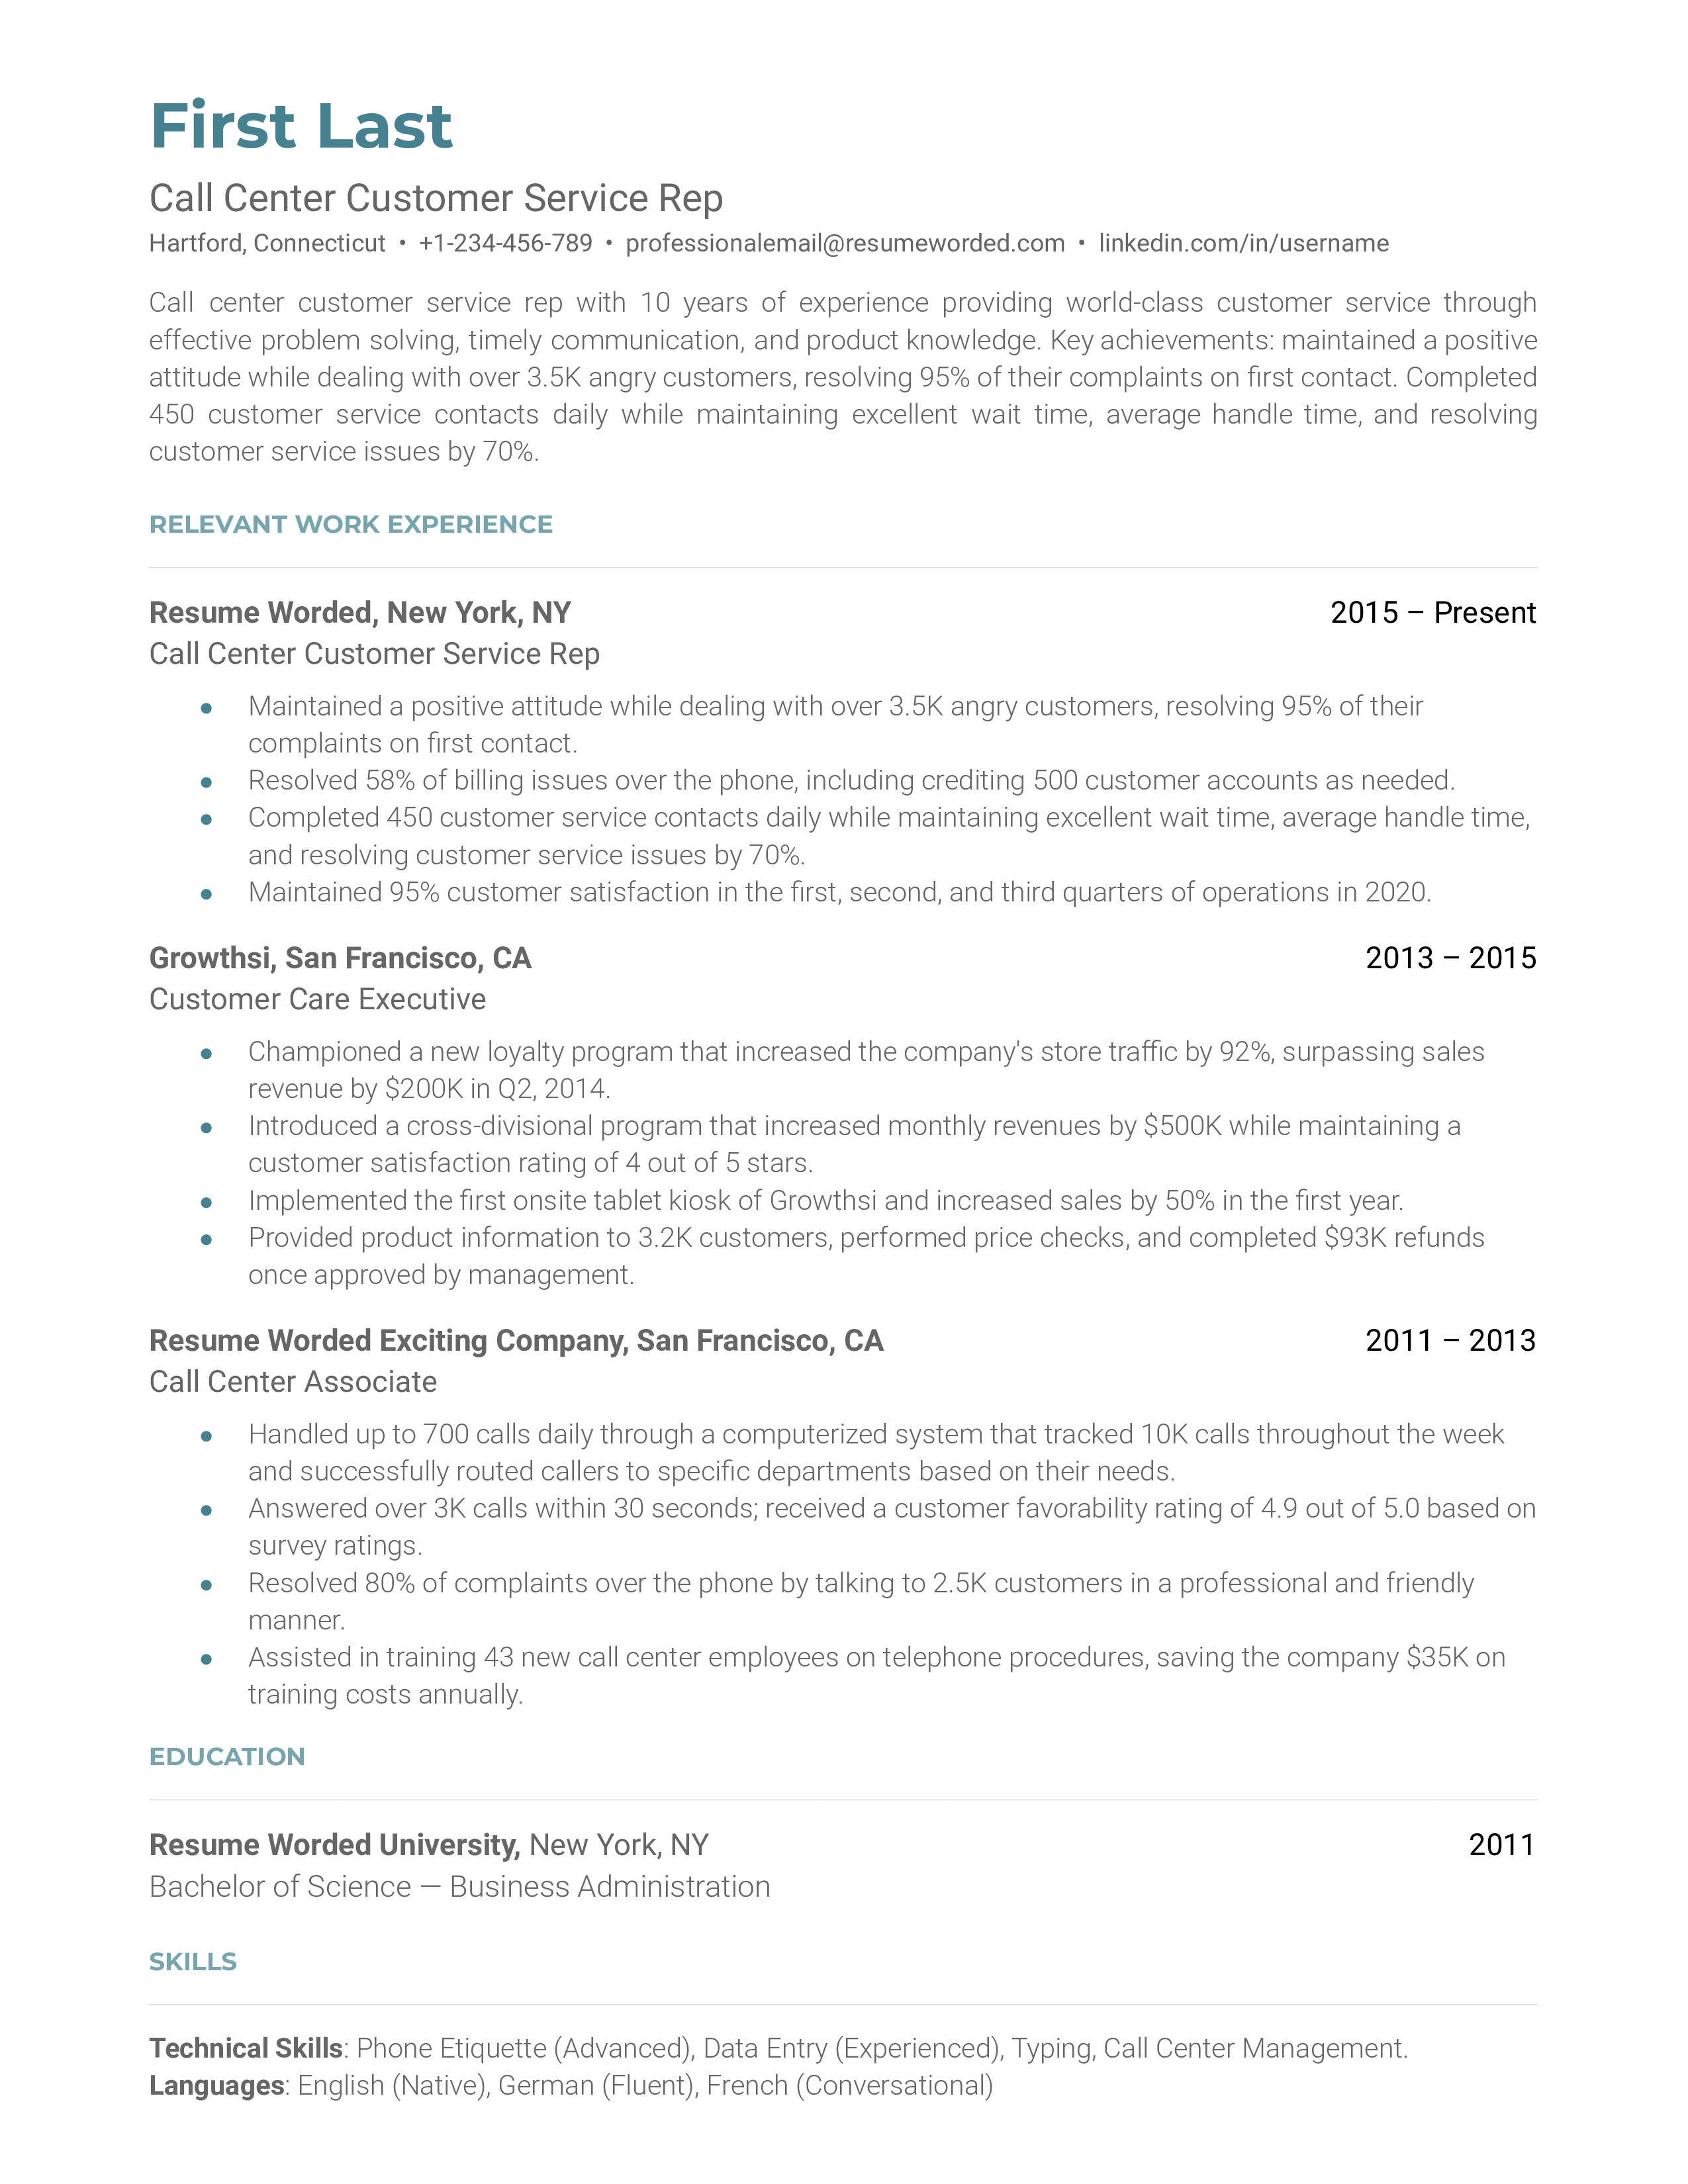 A call center customer service representative resume sample that highlights the applicants communication skills and impressive experience.